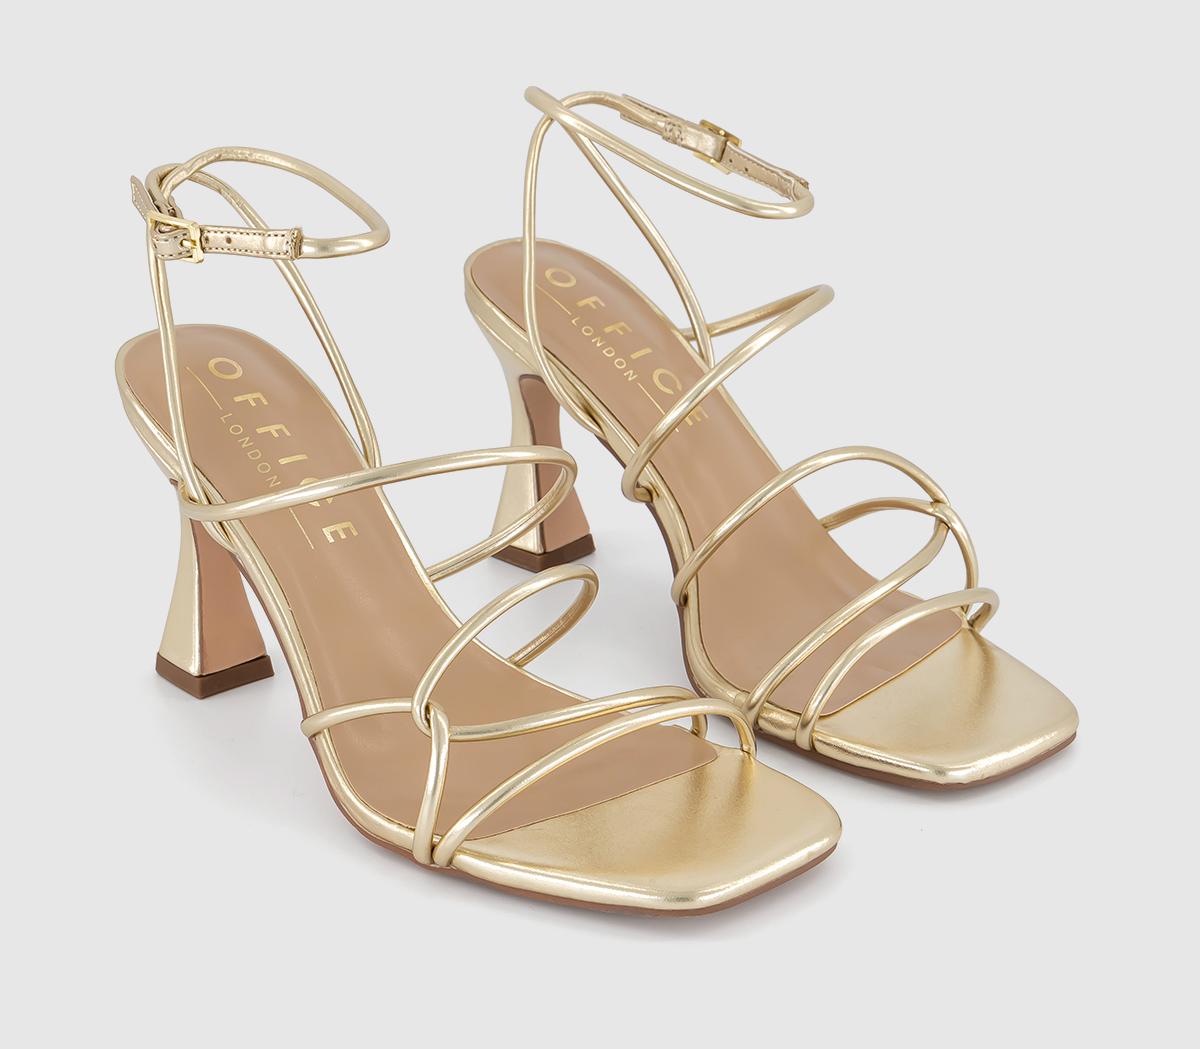 OFFICE Womens Million Dollar Strappy Sandals Gold, 6